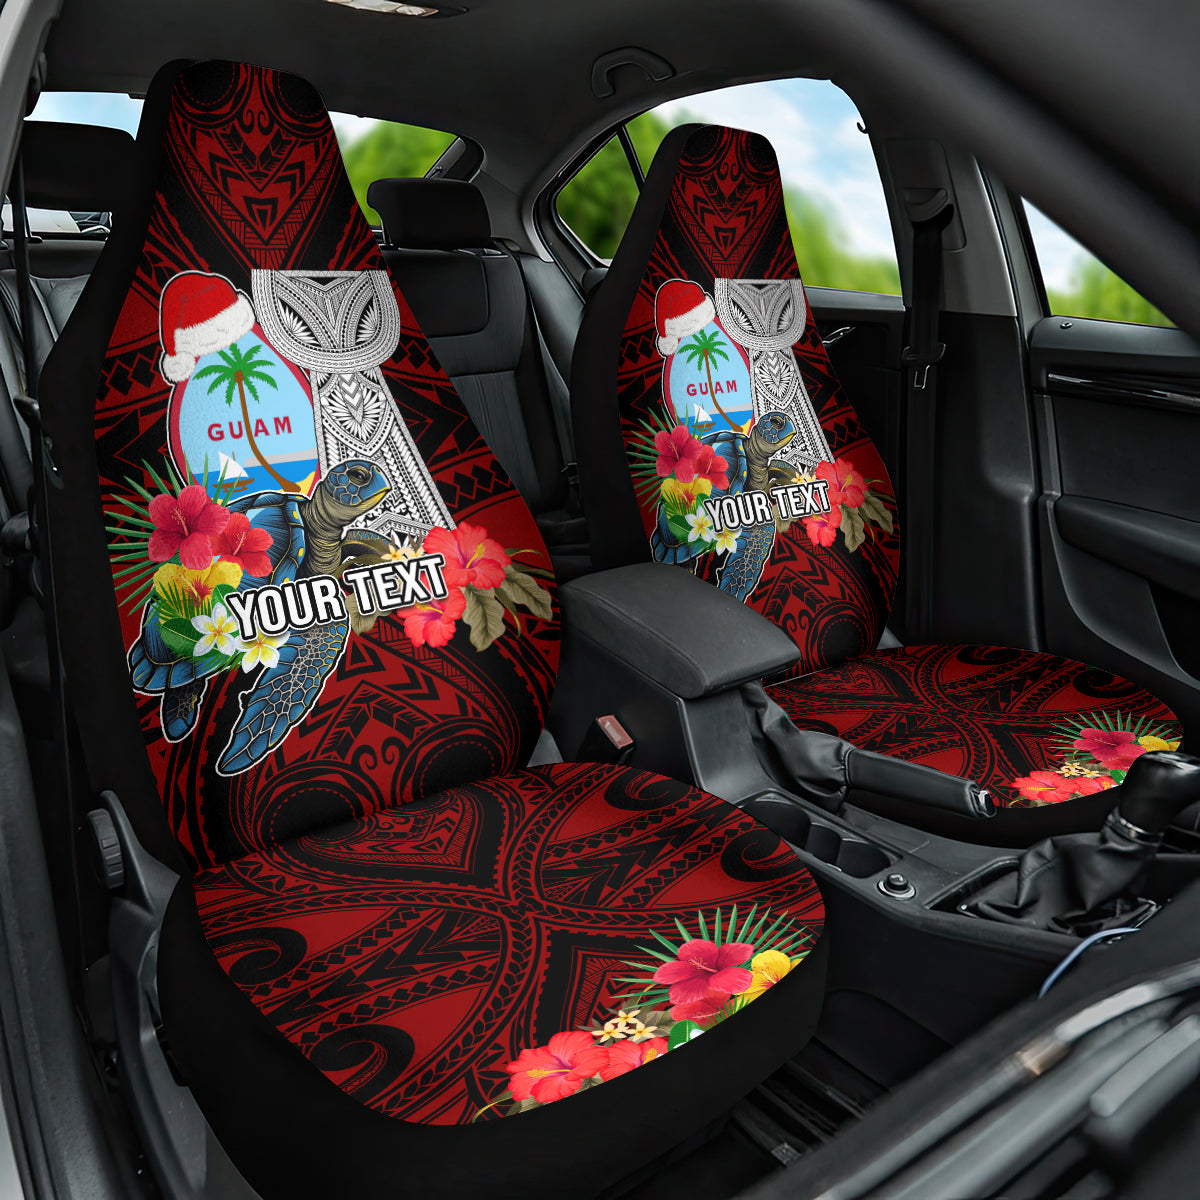 Custom Guam Christmas Car Seat Cover Santa Gift Latte Stone and Sea Turle Mix Hibiscus Chamorro Red Style LT03